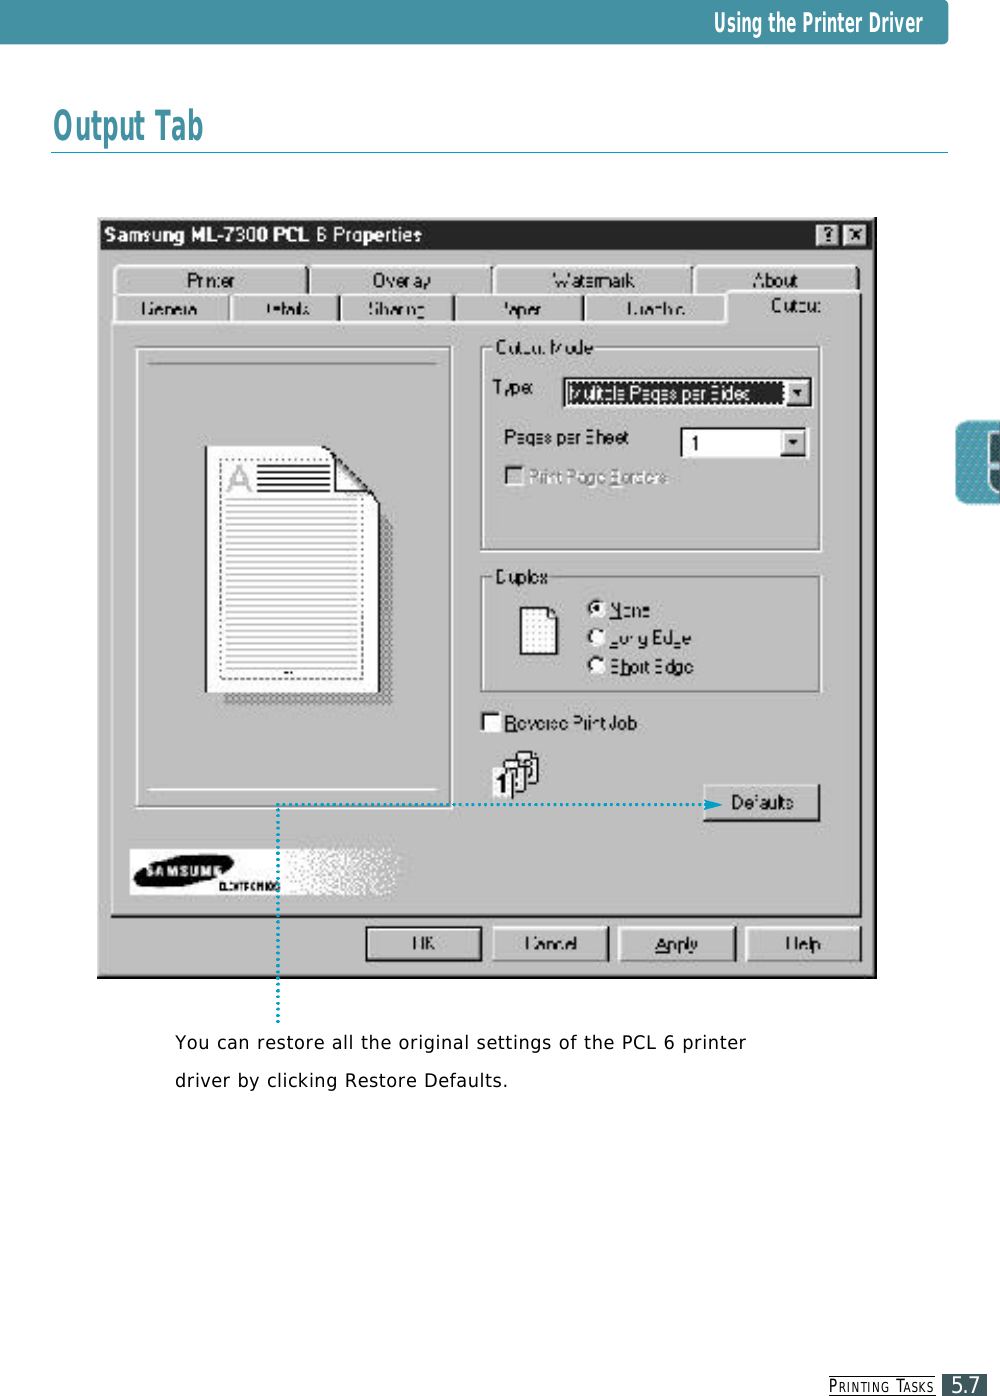 PR I N T I N G TA S K S5.7Output TabYou can restore all the original settings of the PCL 6 printerd r i ver by clicking Restore Defaults.Using the Printer Driver